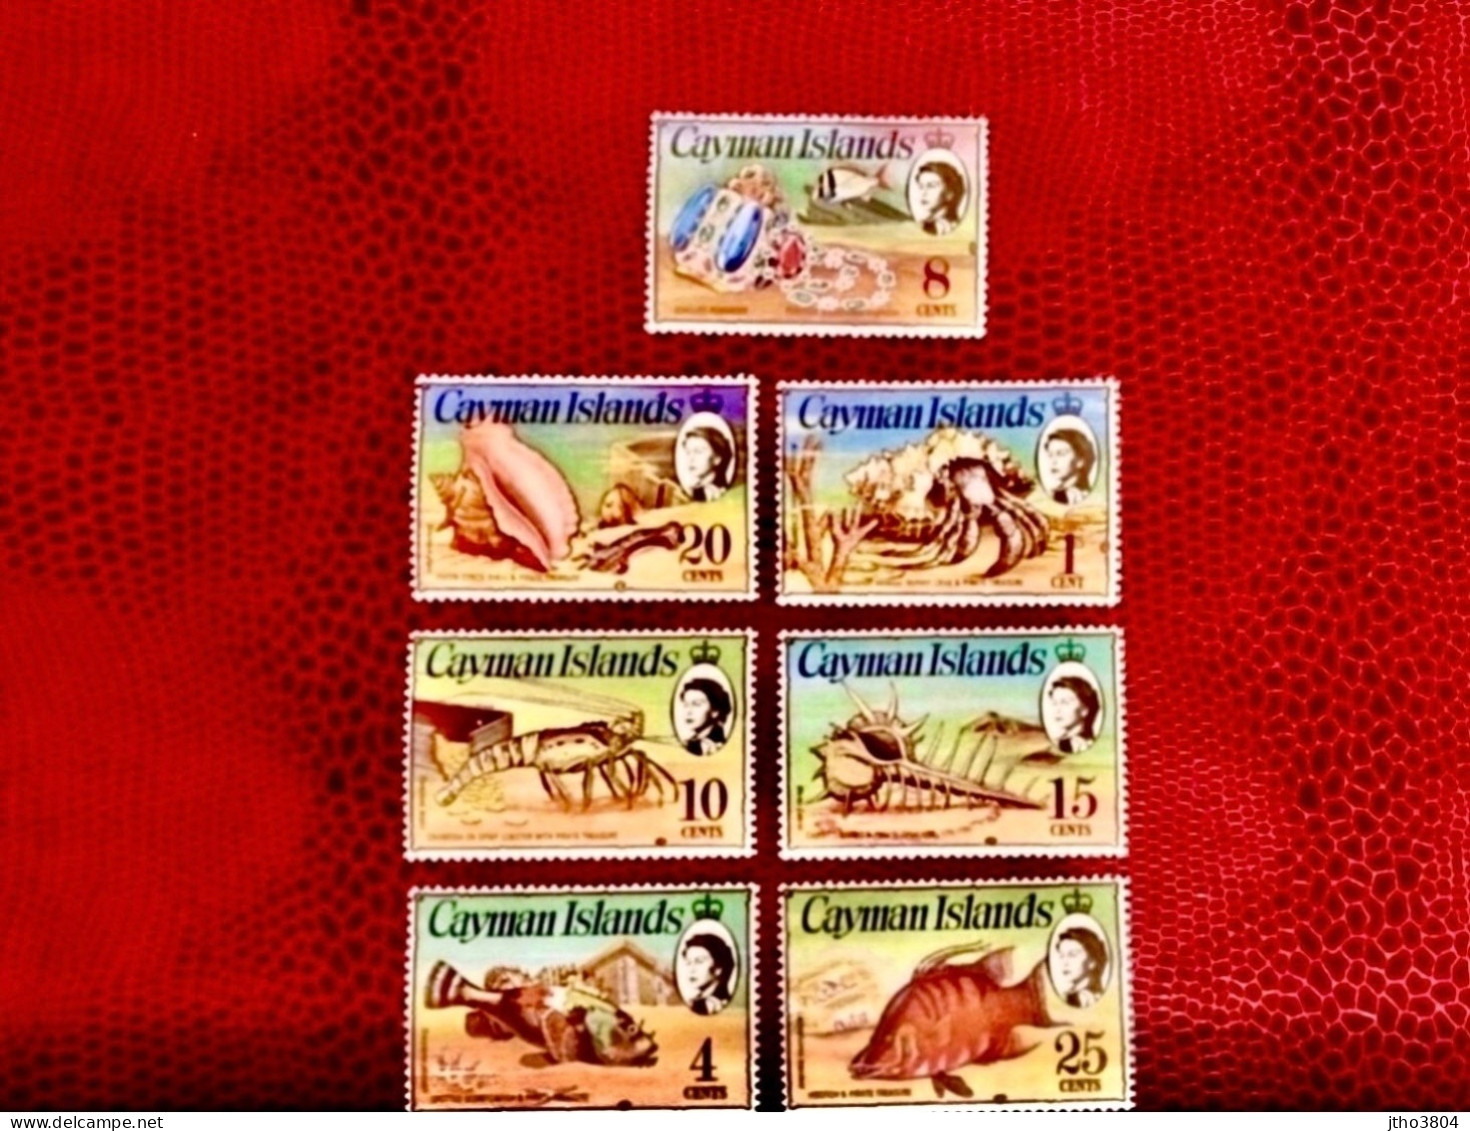 CAYMAN ISLANDS 1974 - 7v Neuf ** MNH Marine Life Shells Conchas Coquillages  Pesce Poisson Fish Pez Fische KAIMAN INSELN - Fishes